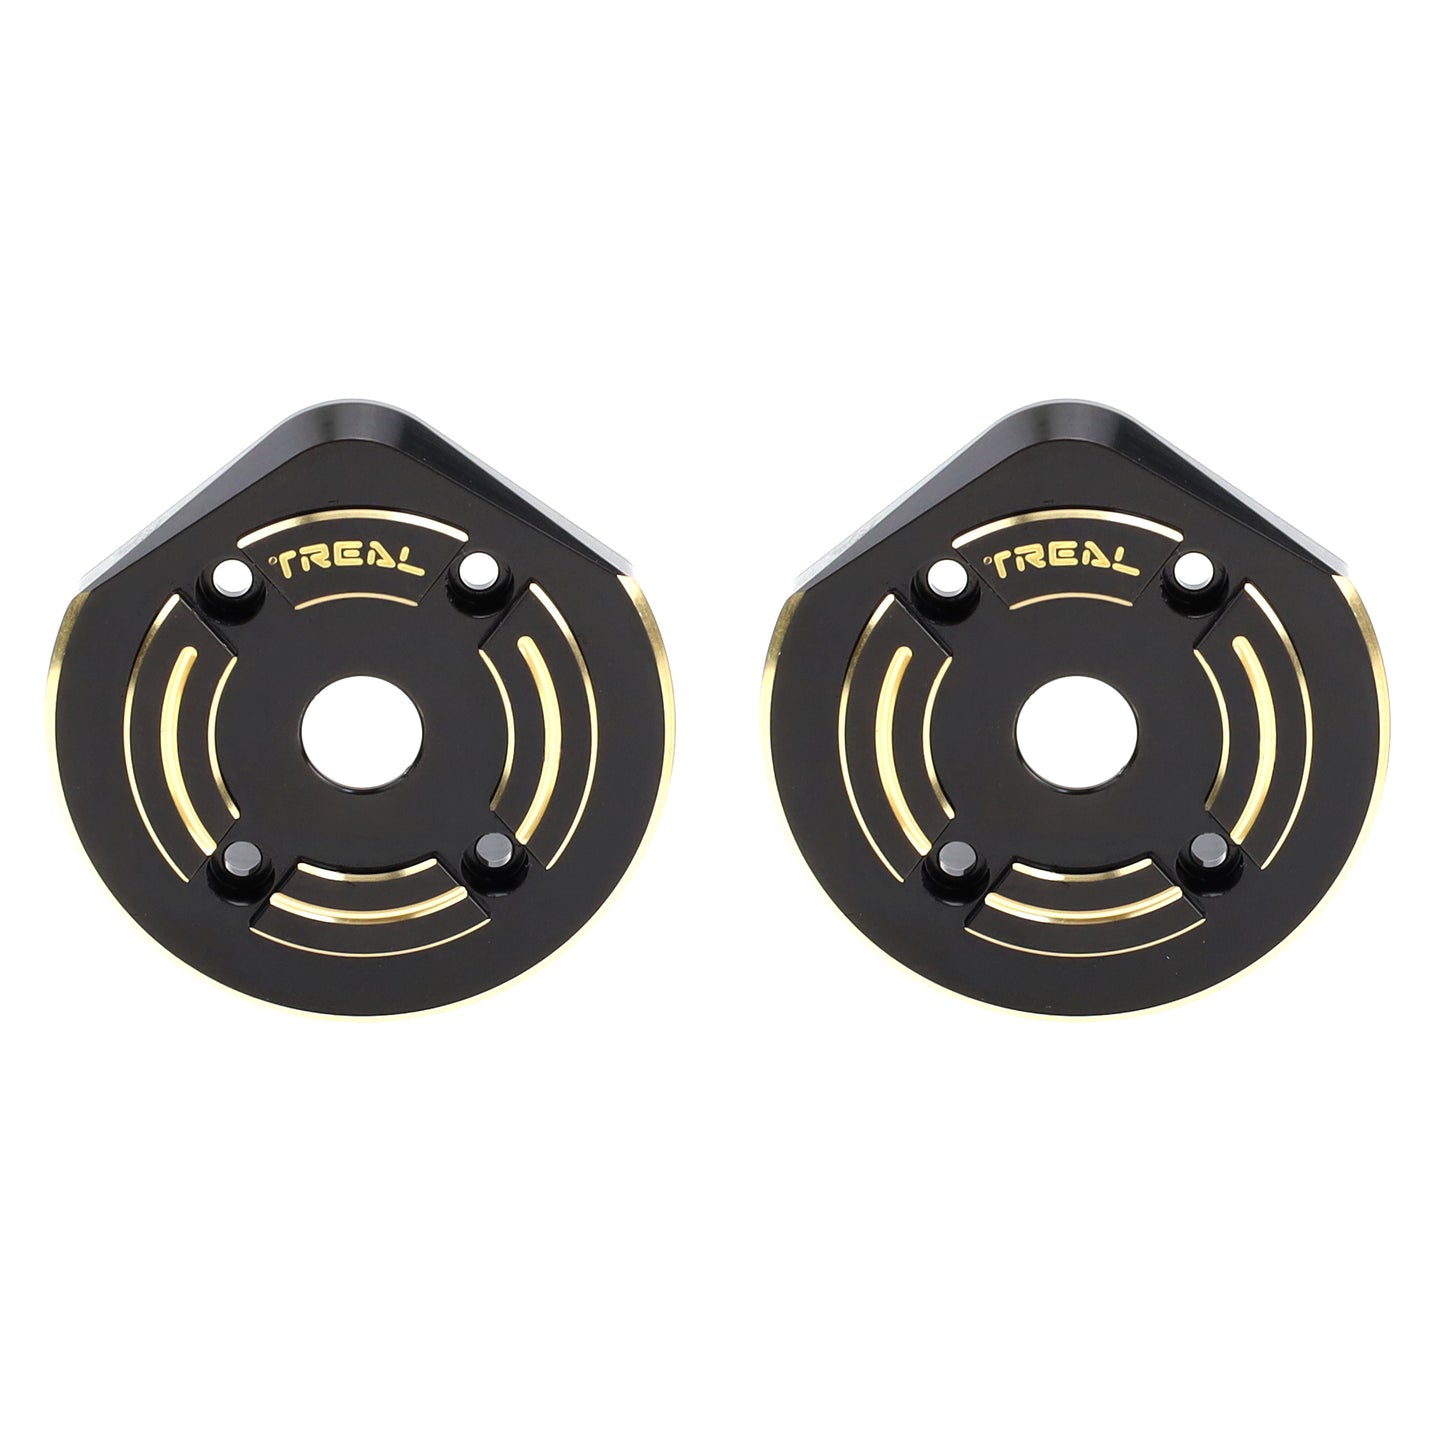 Treal Brass Outer Portal Covers Weights 93g for Axial Capra UTB/SCX10 III -Type B